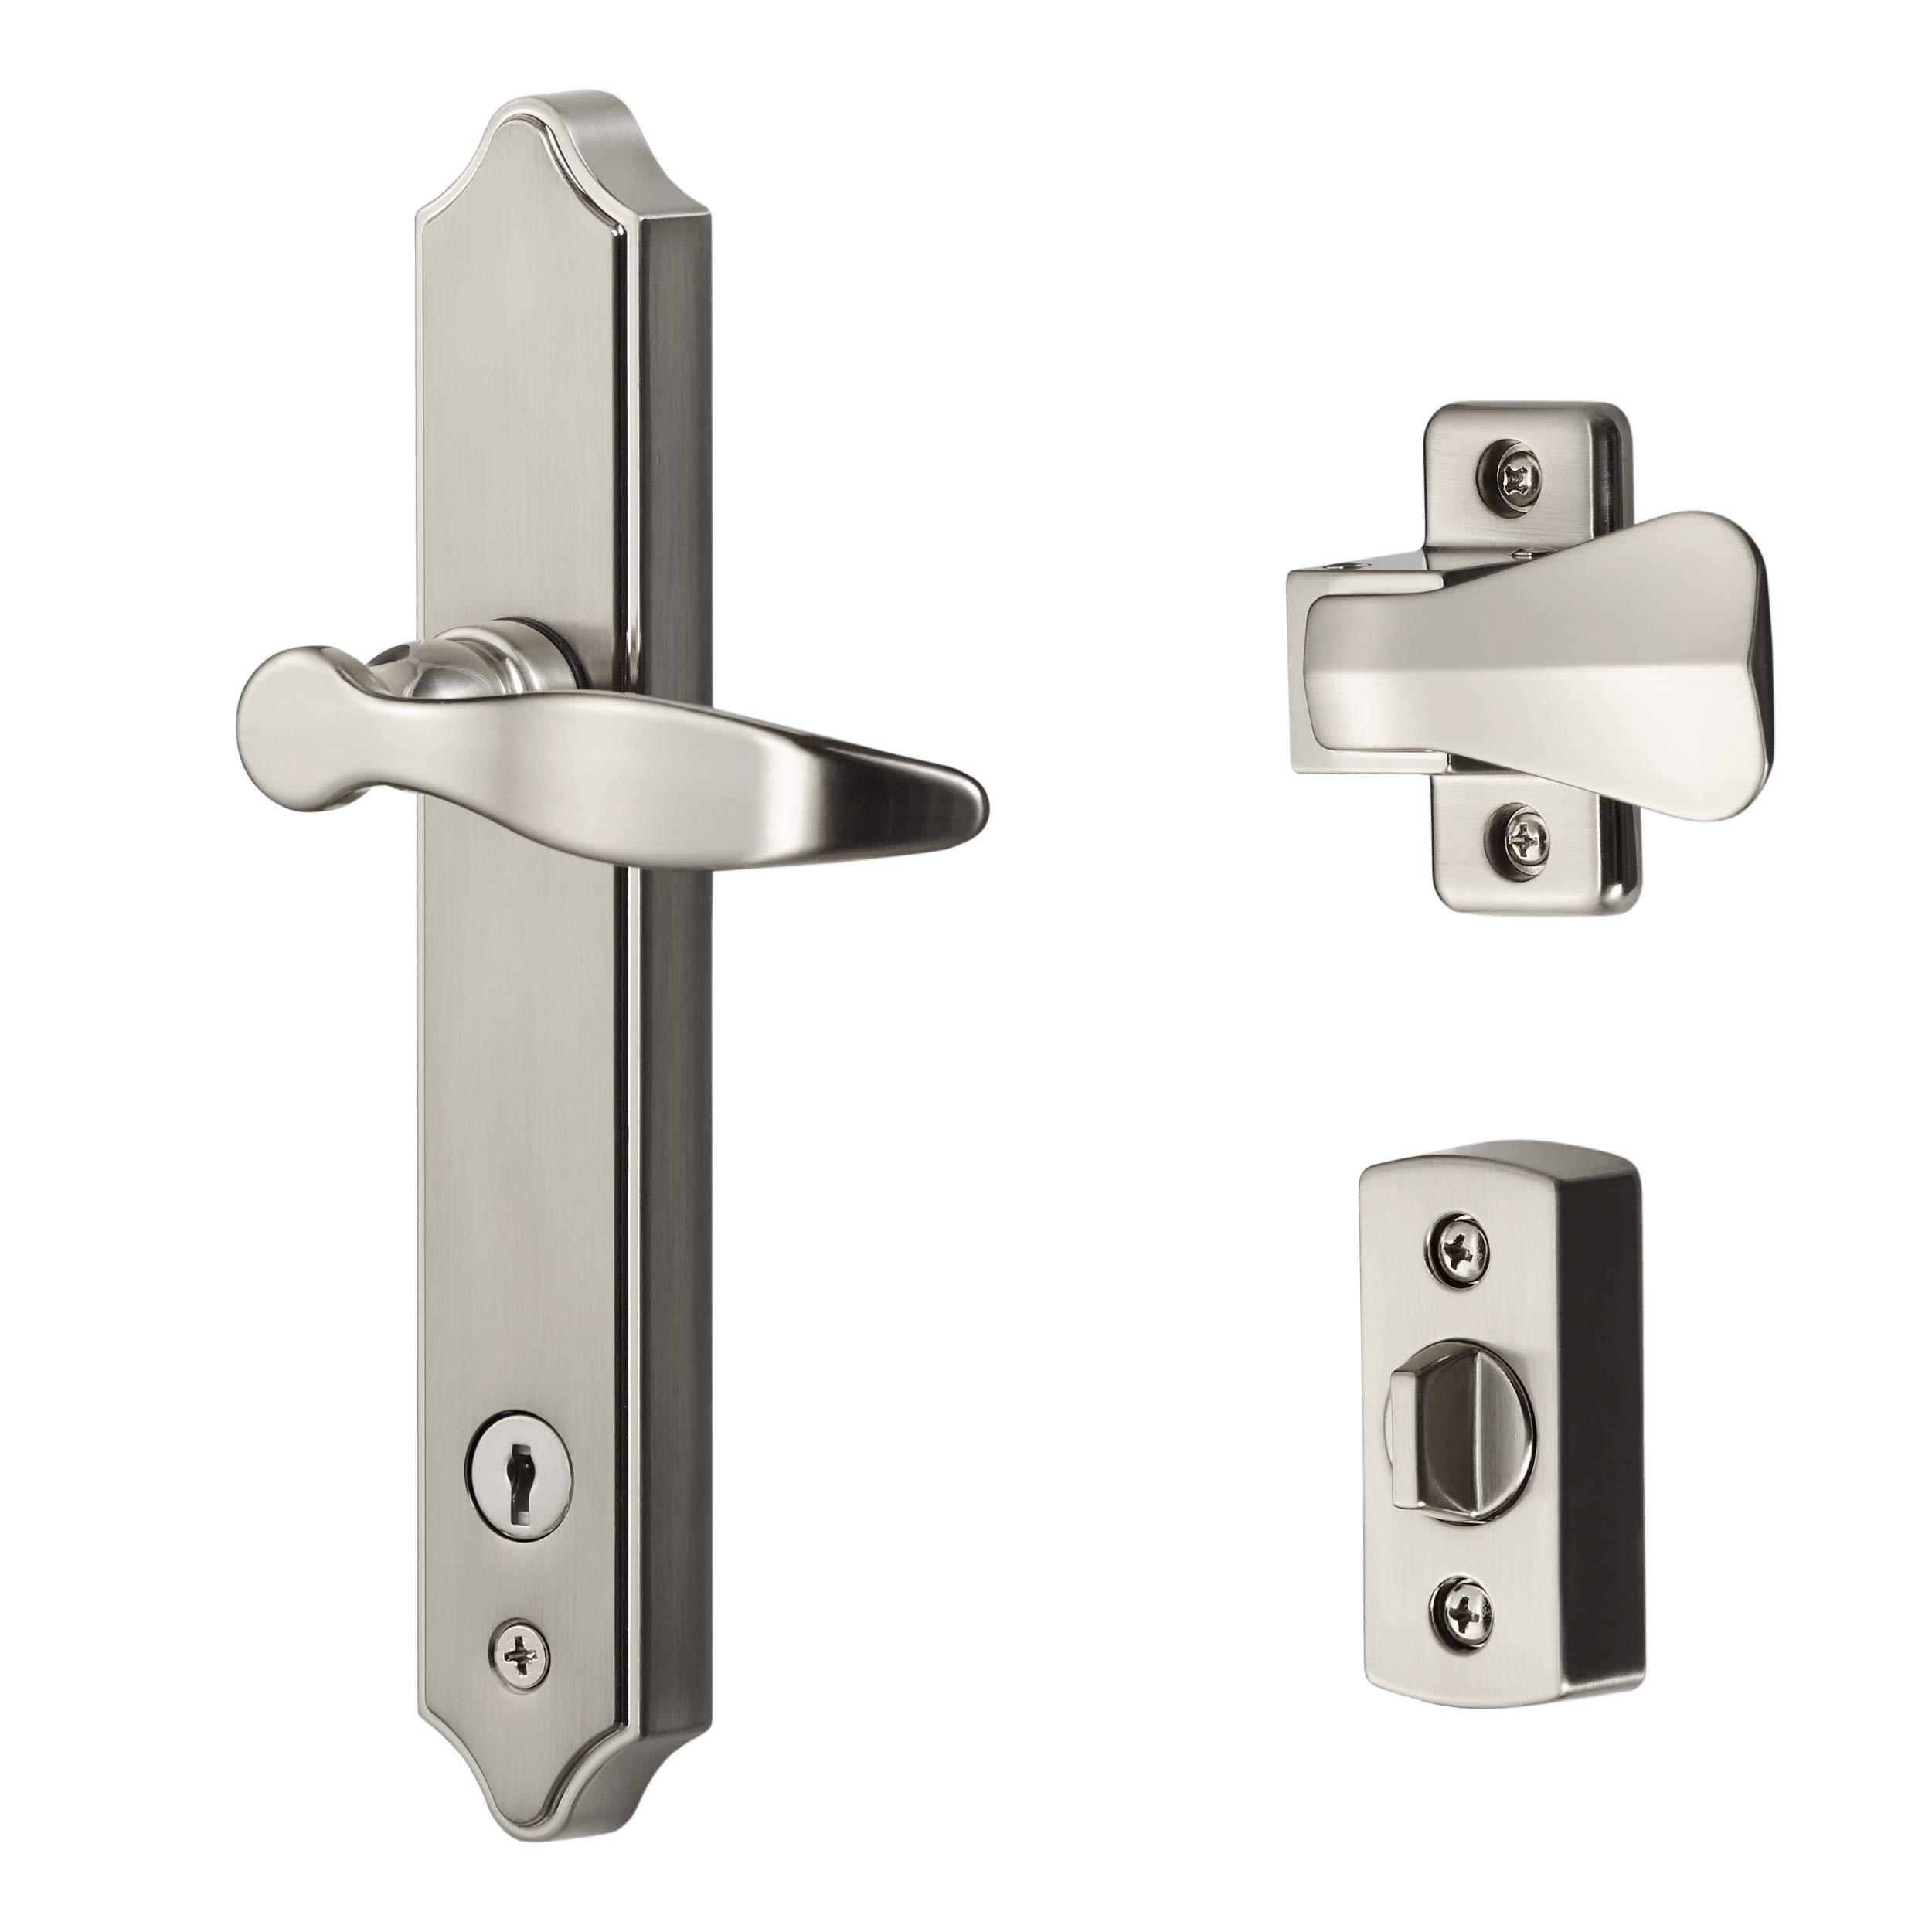 ideal security door lever with deadbolt lock for out-swinging doors, satin silver